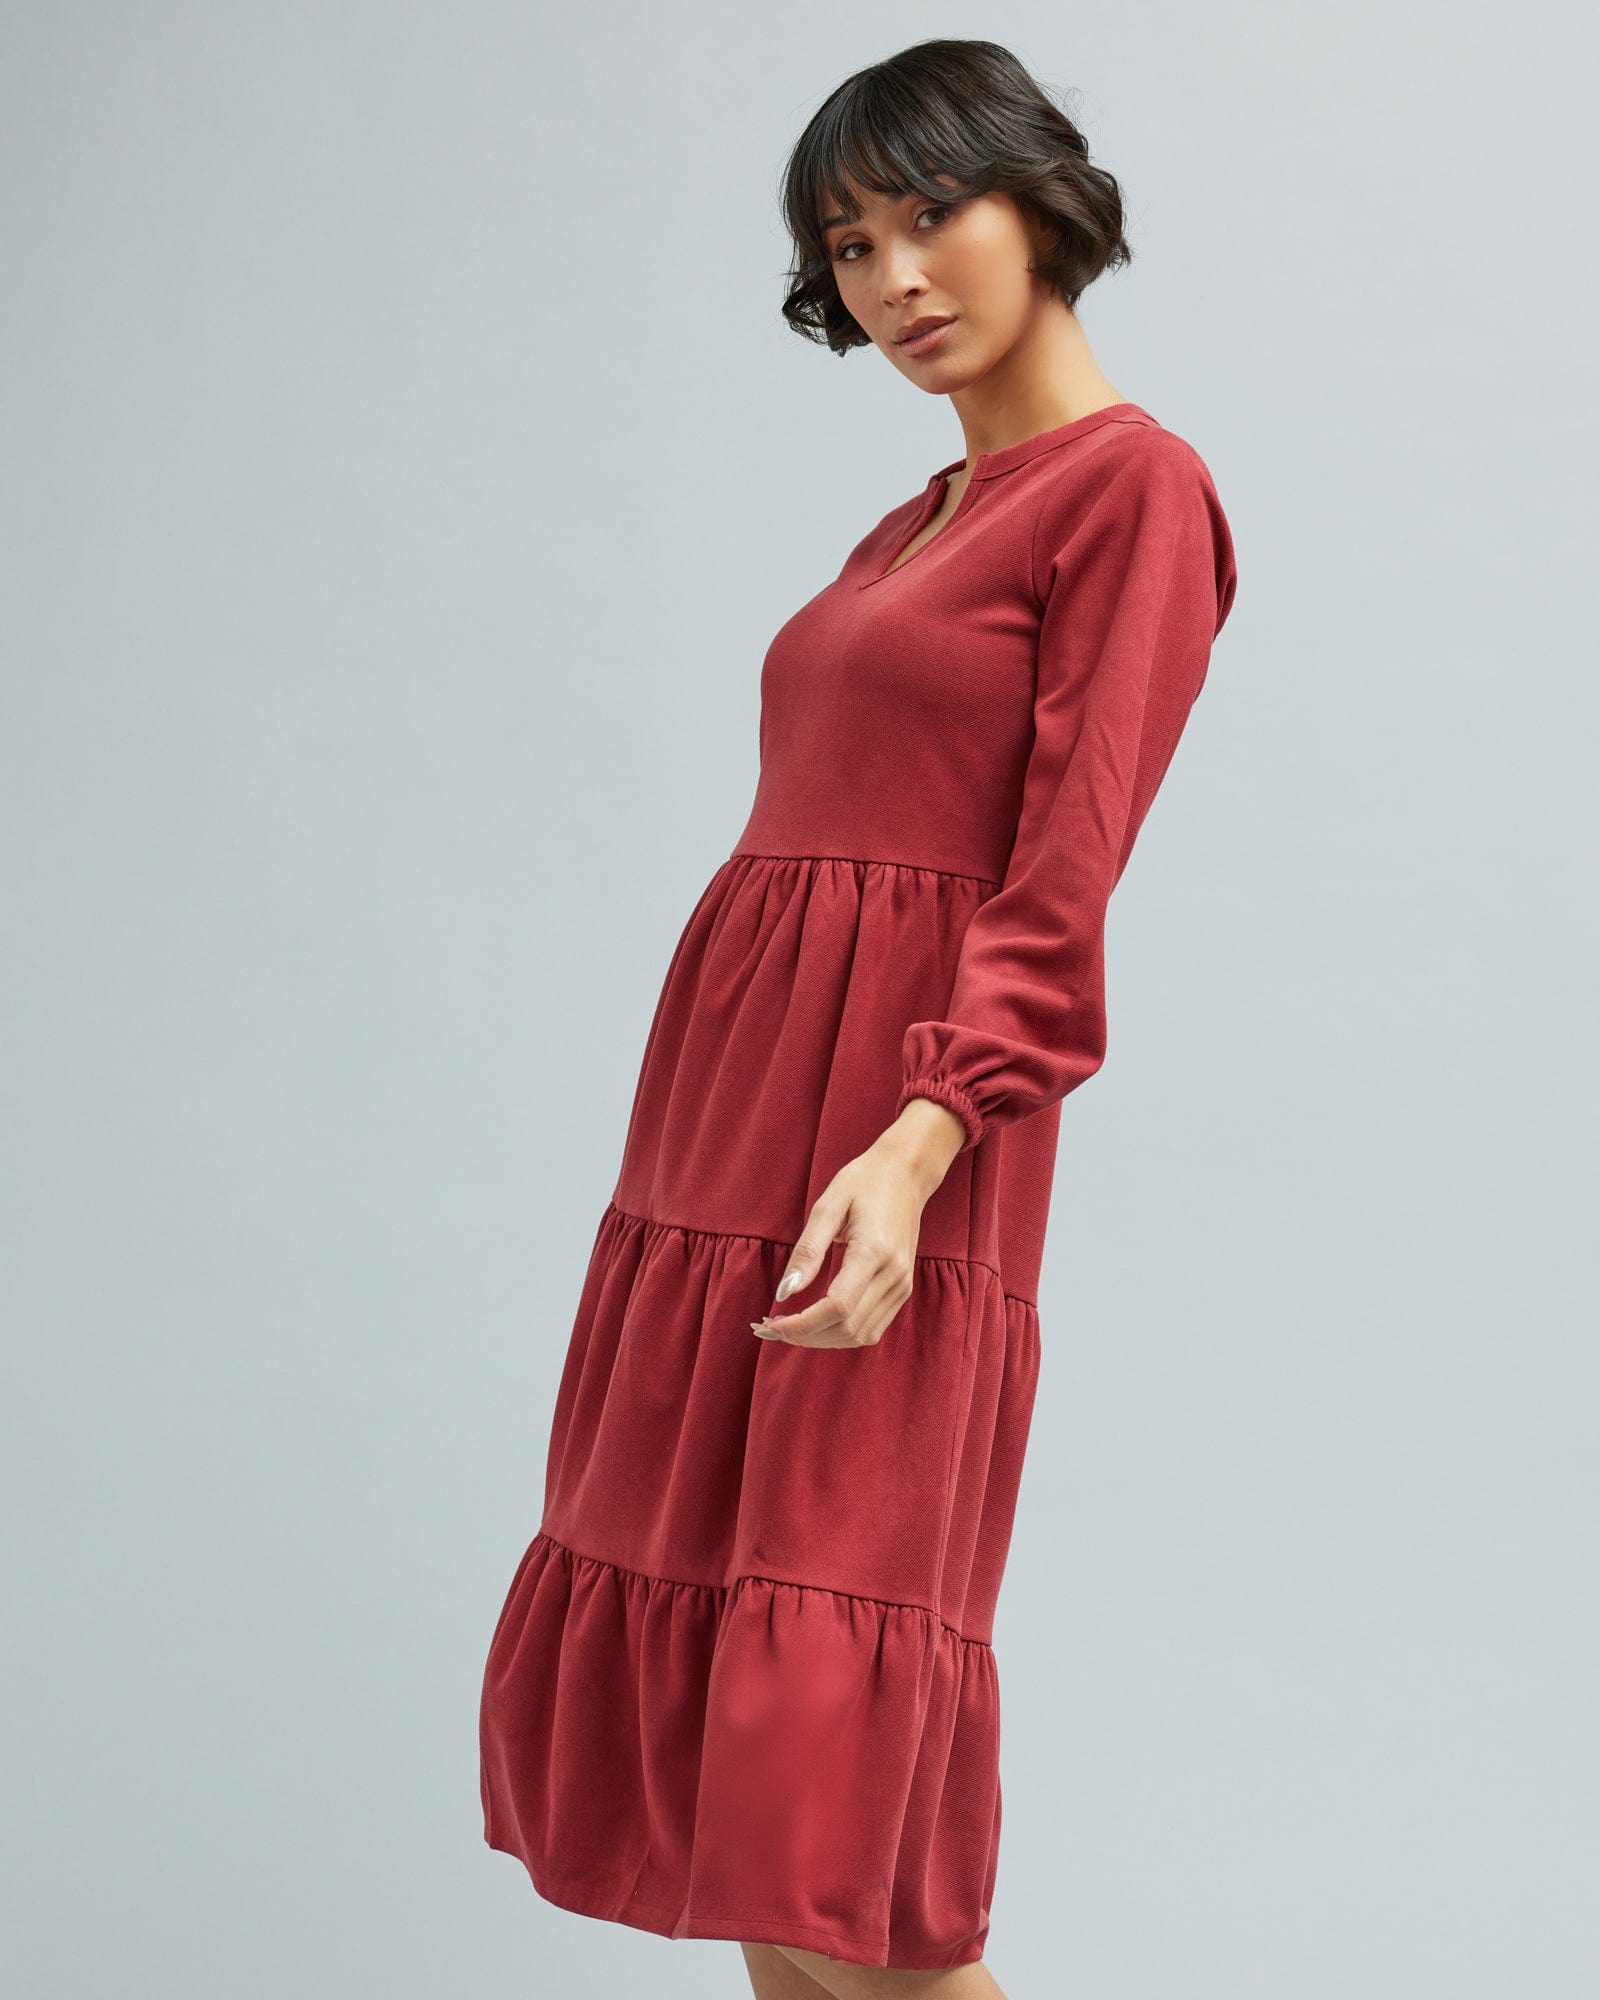 Woman in a long sleeve, tiered skirt, brick red dress.